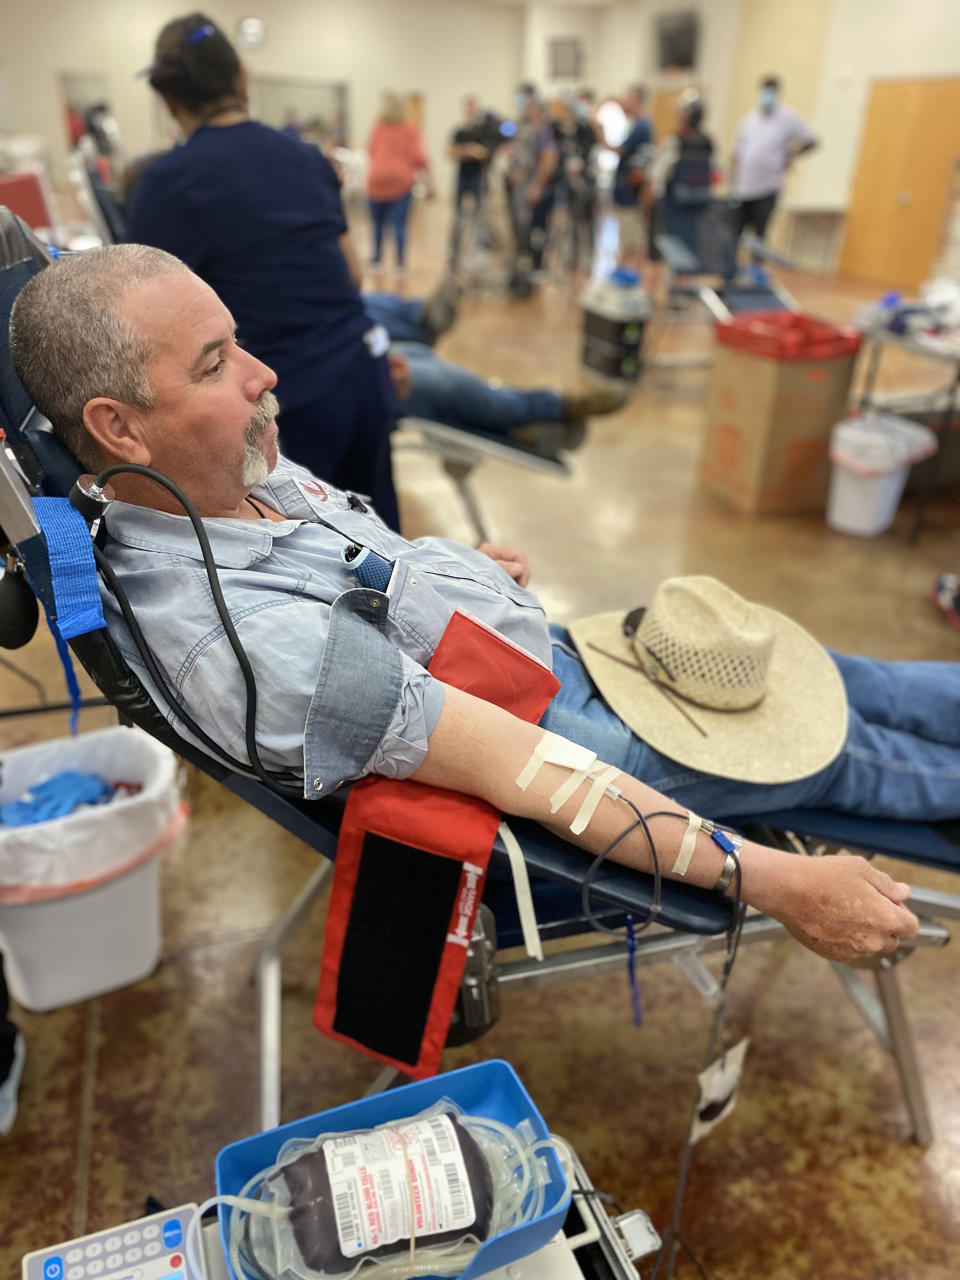 Pete drove 65 miles to give blood in Uvalde after his granddaughter survived the elementary school shooting that killed 21 people. (Danielle Campoamor / TODAY)